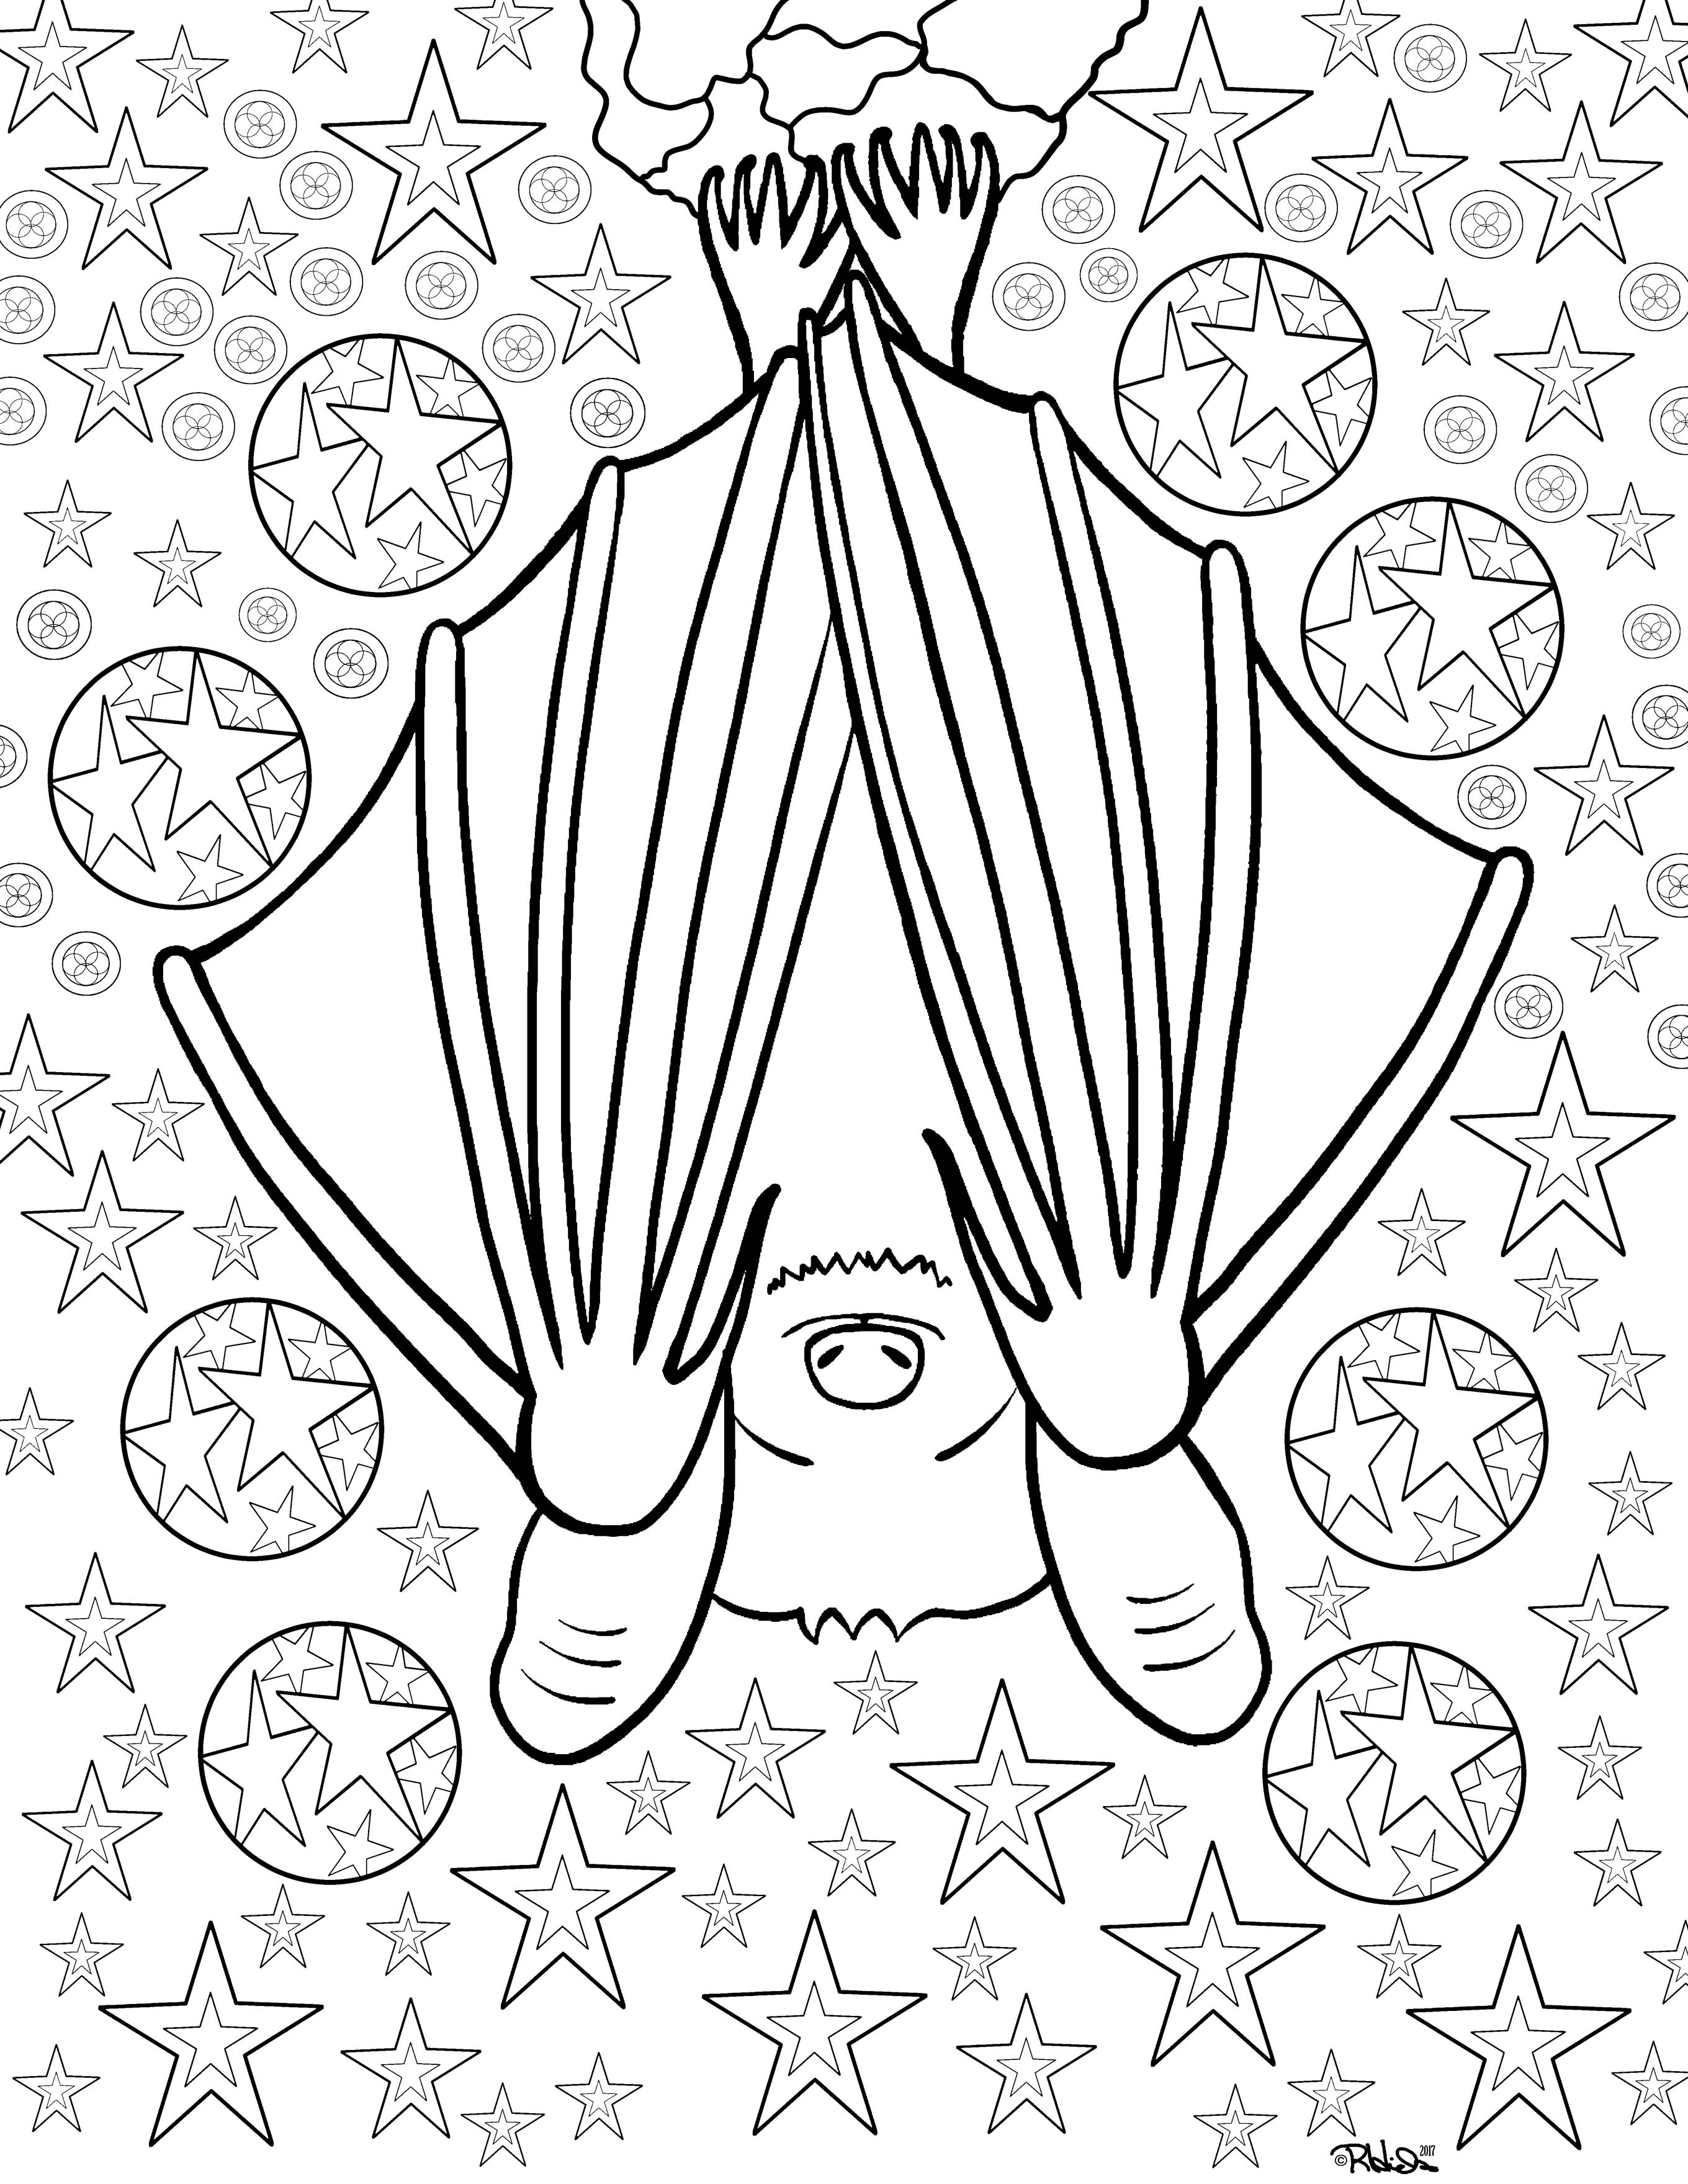 Coloring book page depicting a bat hanging upside down